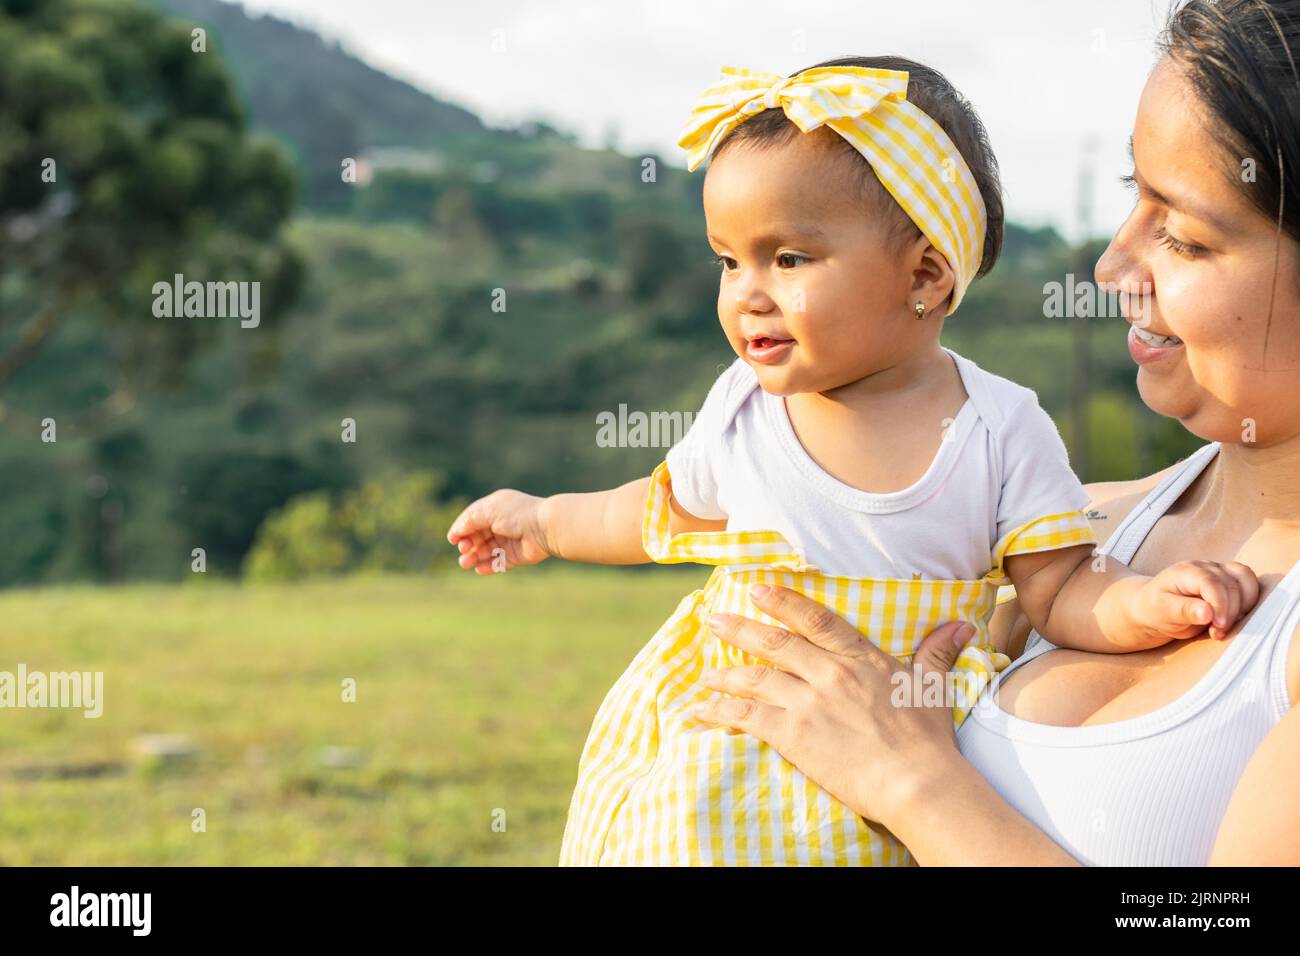 latin mother holding her daughter in an outdoor field, smiling and living a beautiful family moment. summer day with mom. concept of joy. Stock Photo